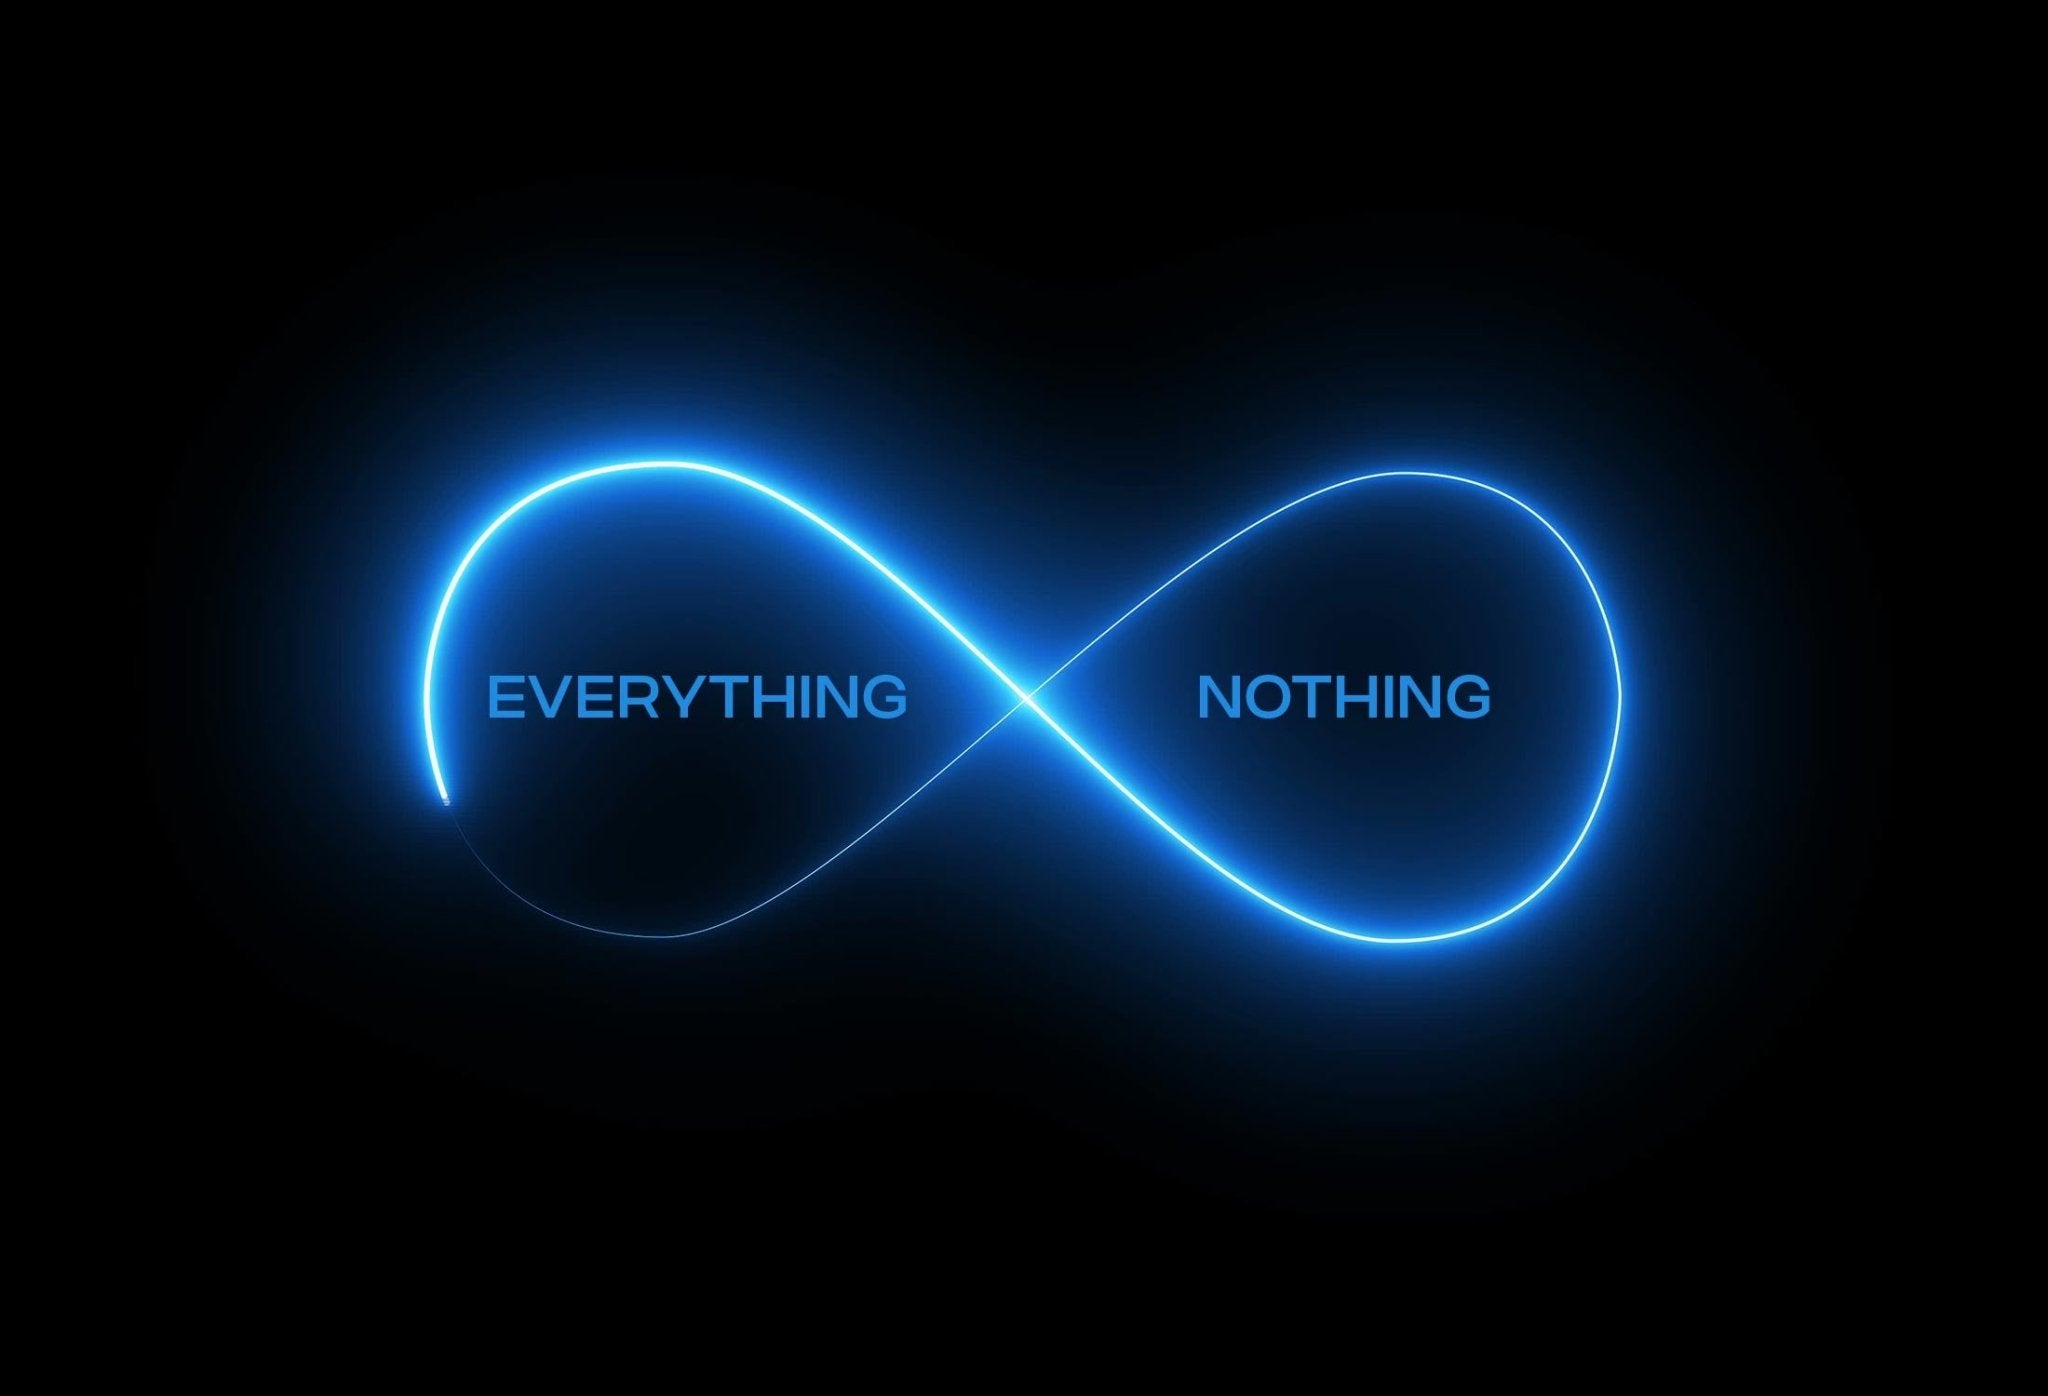 Life is Everything & Nothing Simultaneously - A Conscious State